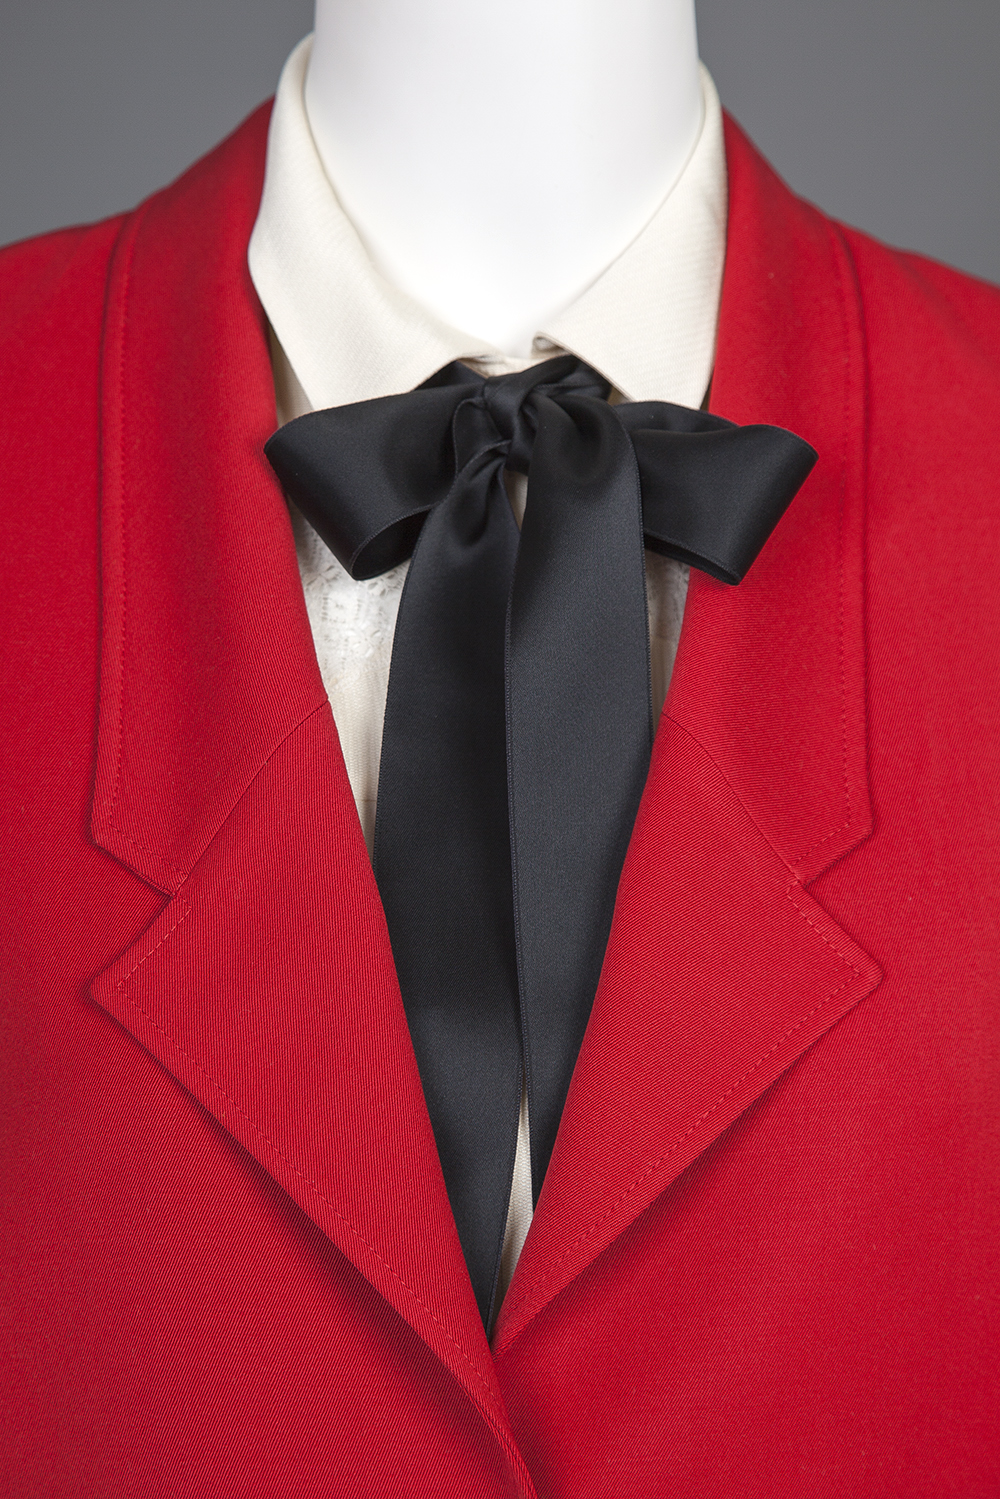 Red jacket with black bow tie